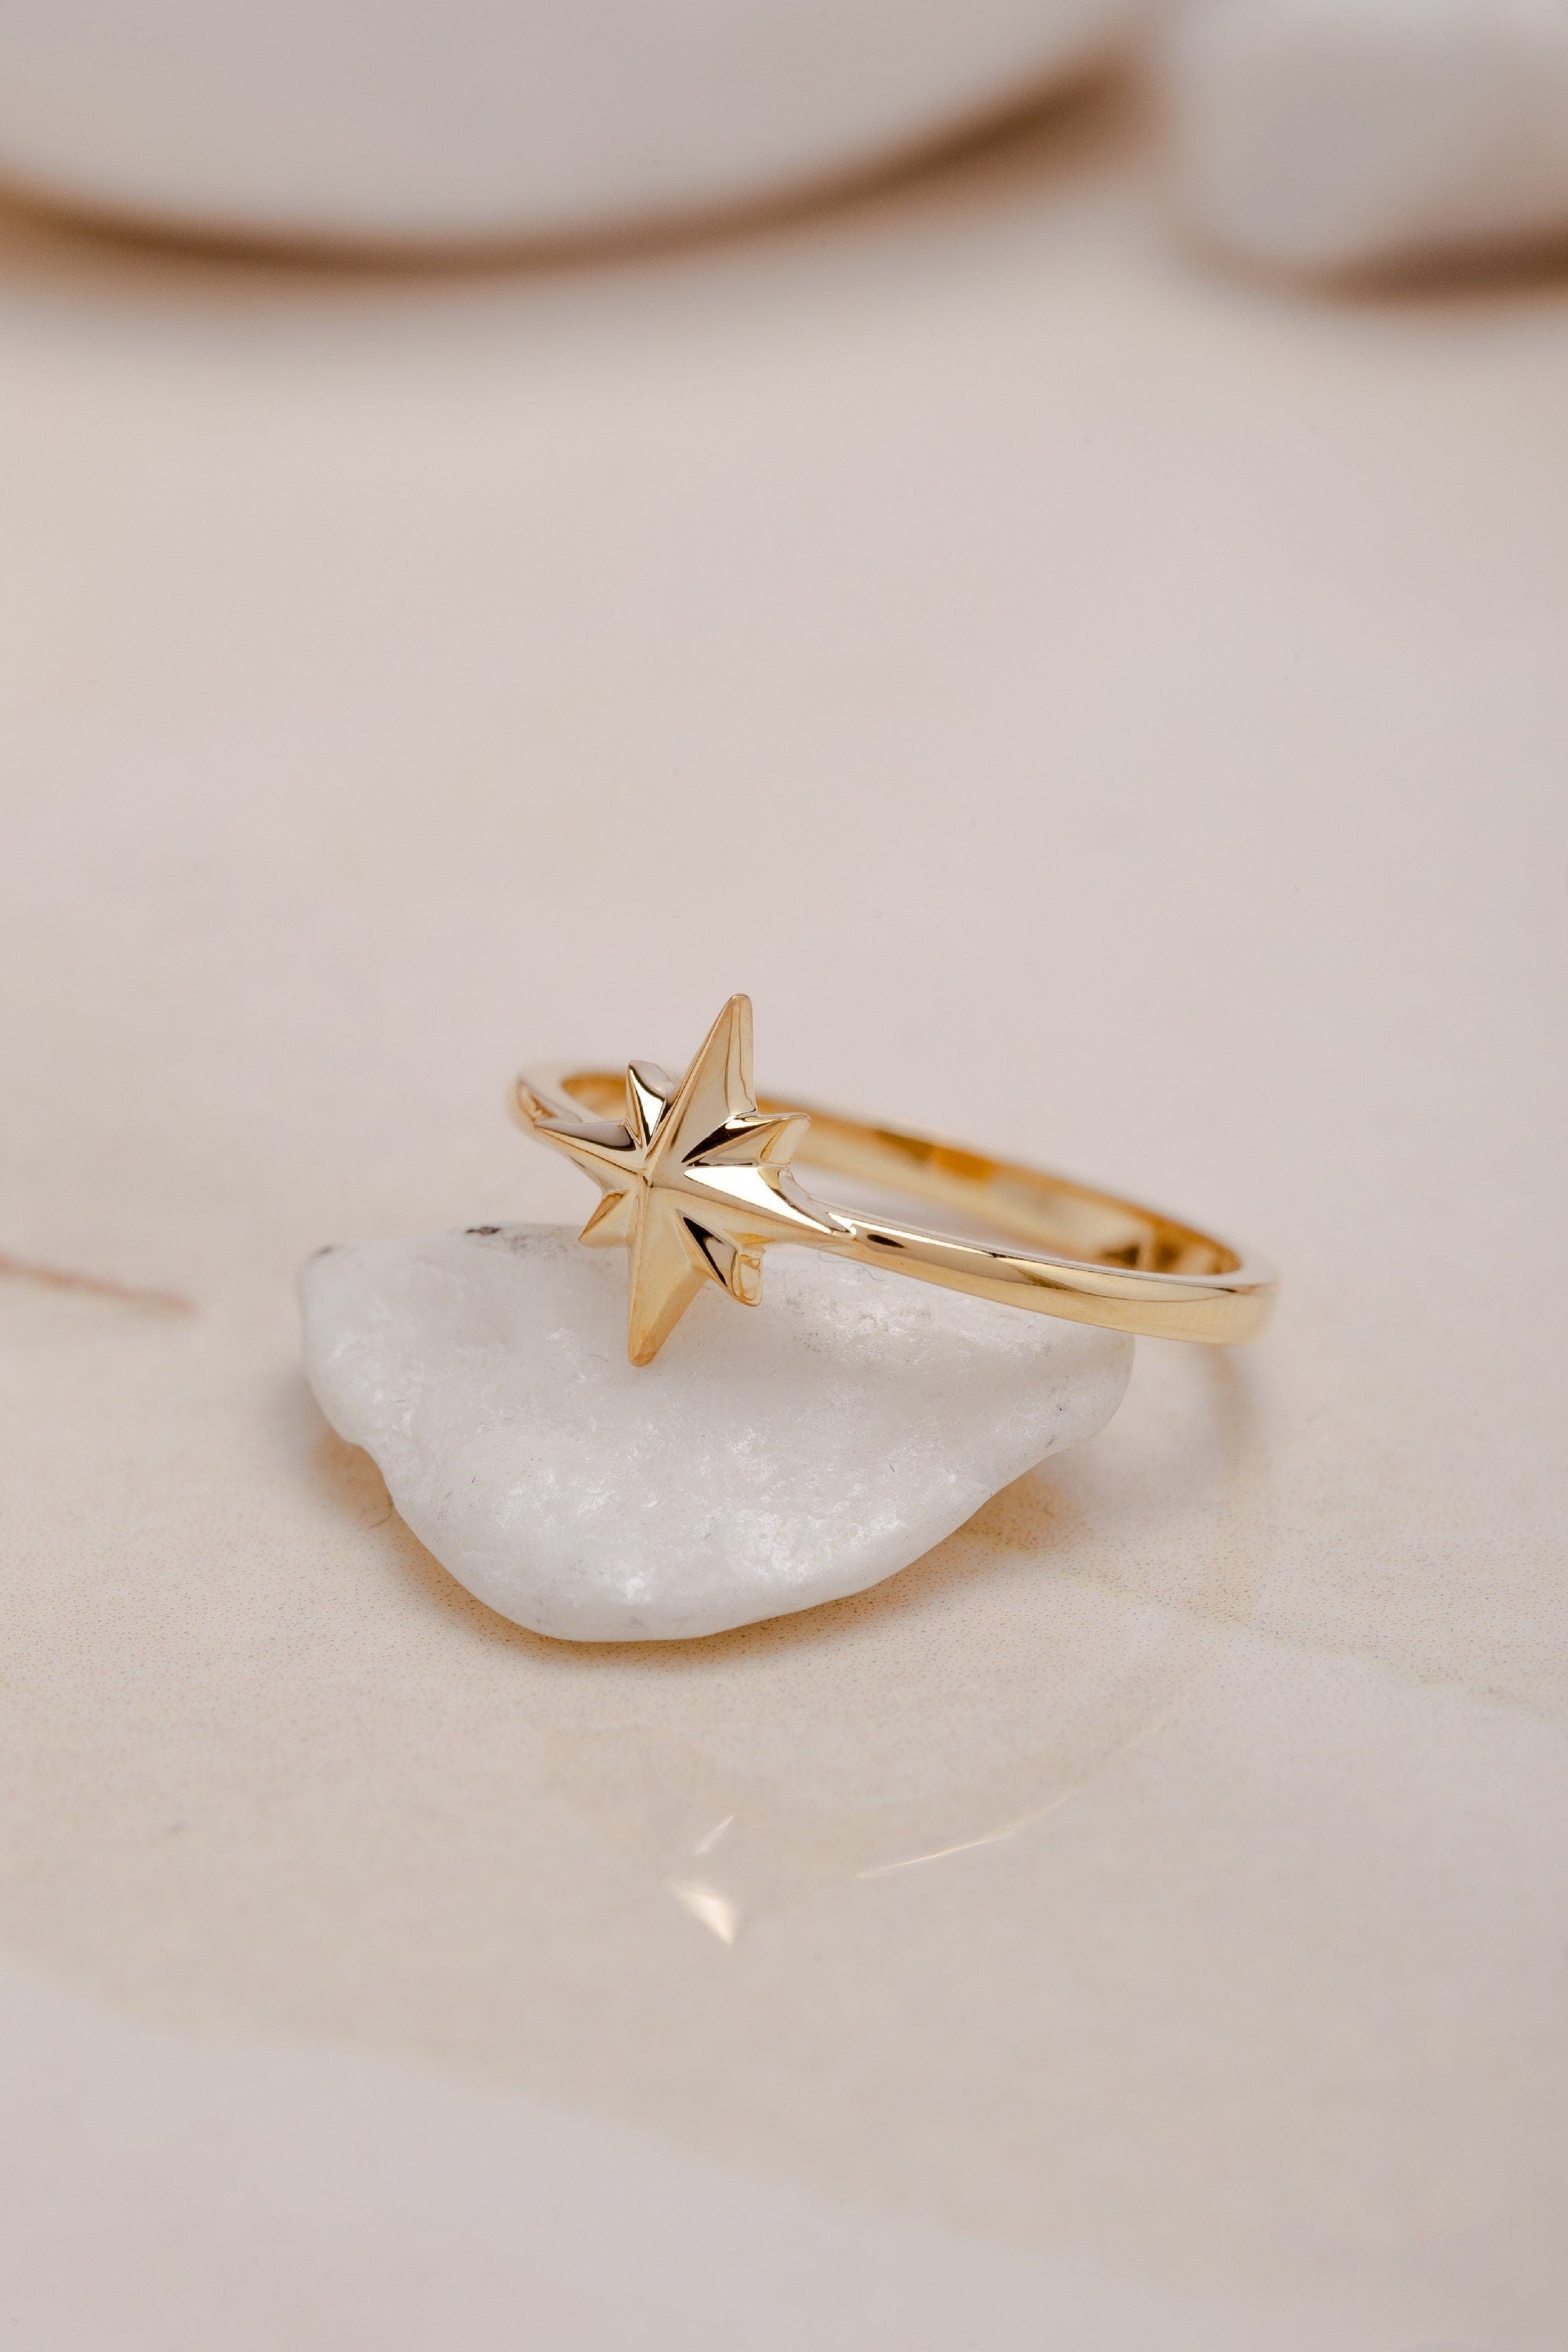 925 North Star Shaped White Gold Ring, Stackable Starburst Ring, Handmade Ring, Gift For Mother Day, Mother Day Jewelry, Gift for Her